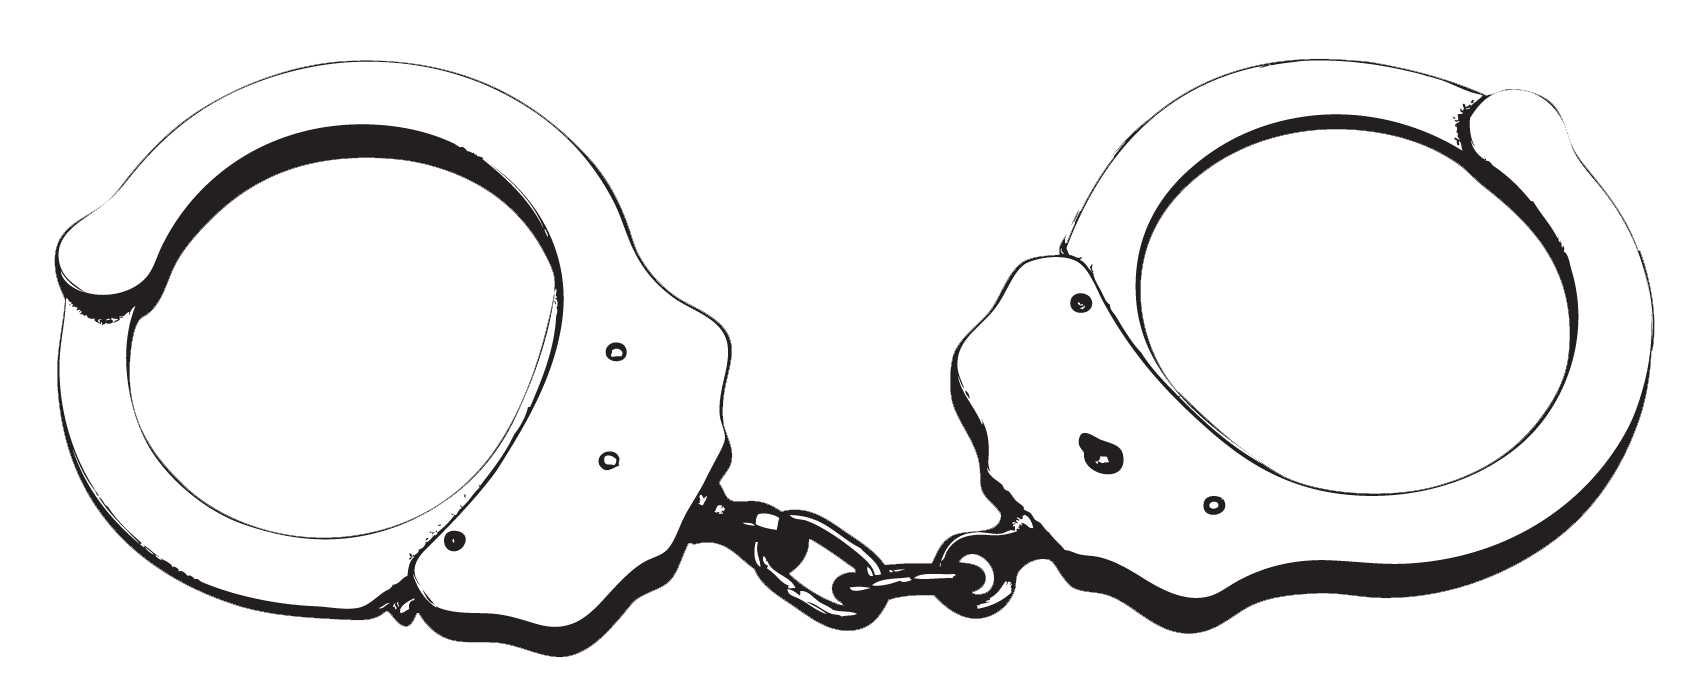 Coloring pages best ideas. Handcuffs clipart drawing